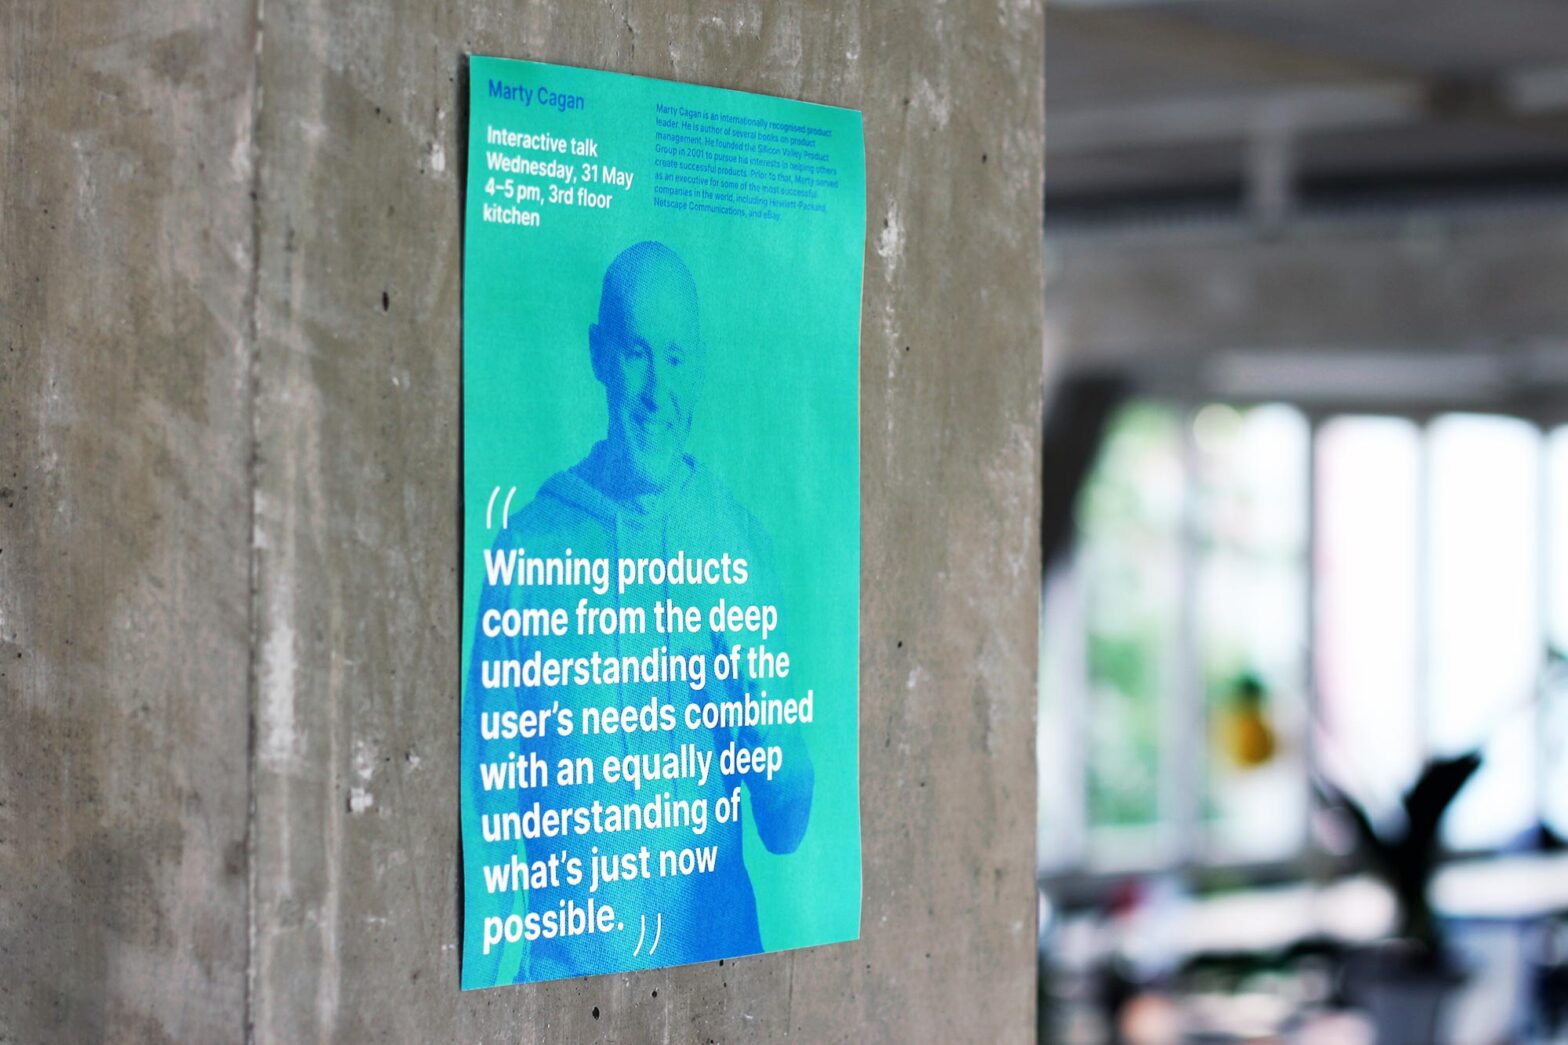 A bright green poster on a bare concrete wall in an office space, it shows the picture of a middle-aged white man with a big quote: “Winning products come from the deep understanding of the user’s needs combined with an equally deep understanding of what’s just now possible.”